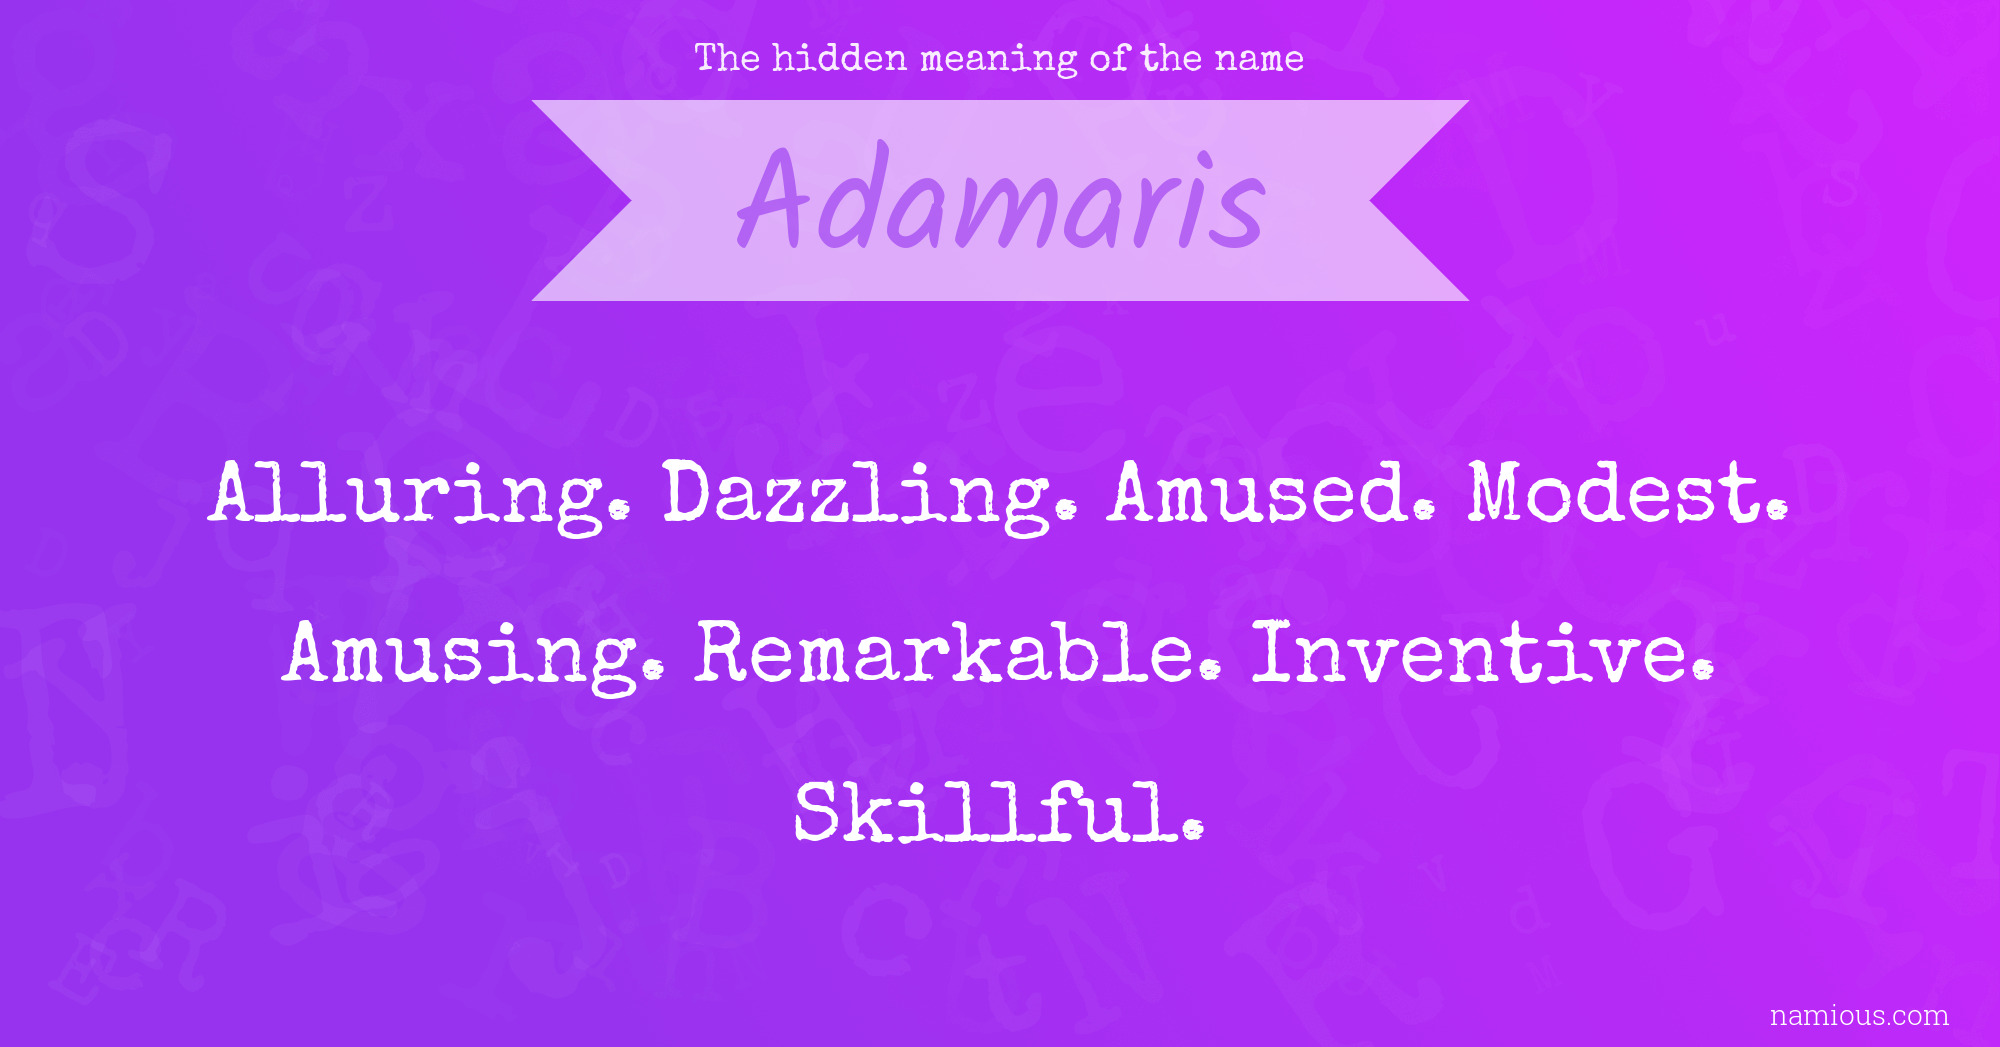 The hidden meaning of the name Adamaris